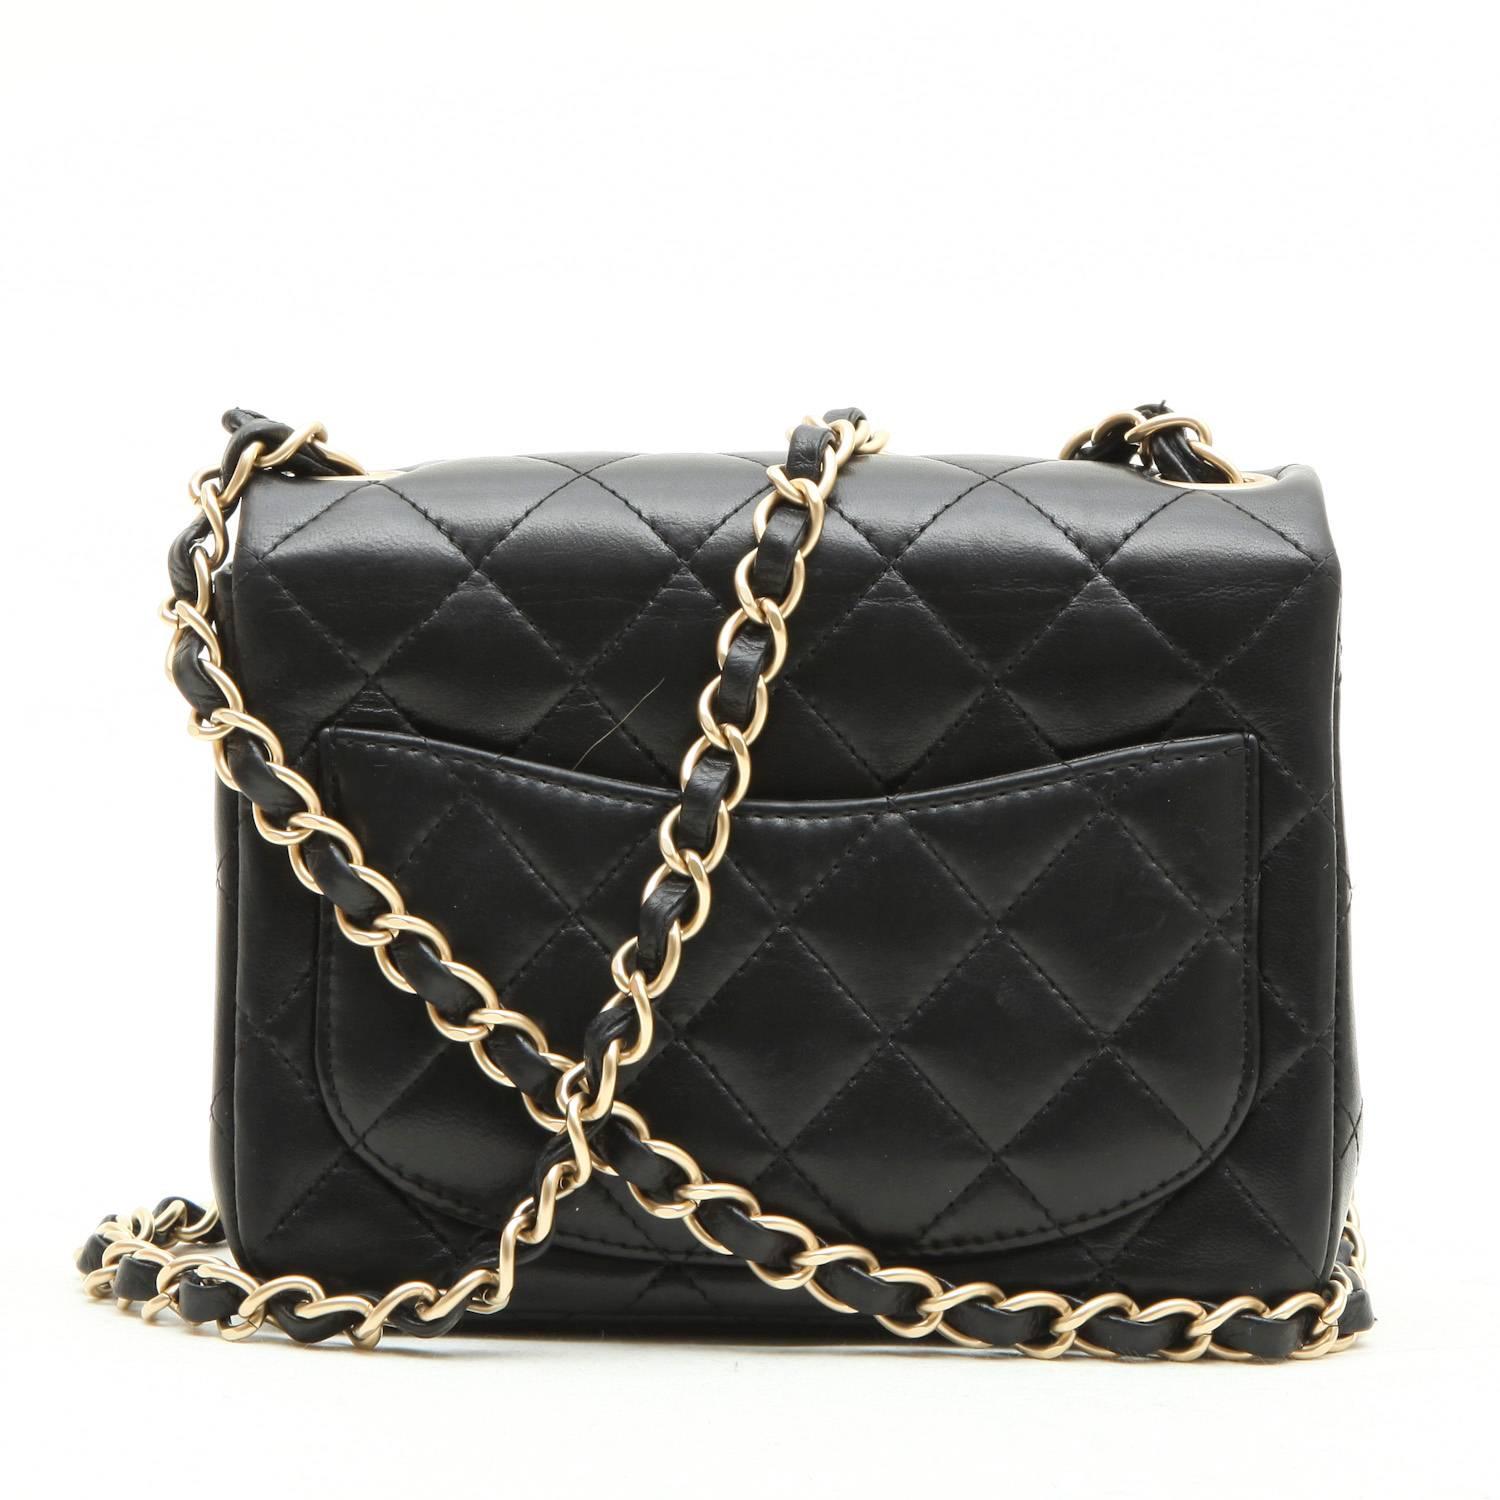 Mini CHANEL Bag in Black Quilted lambskin Leather 1